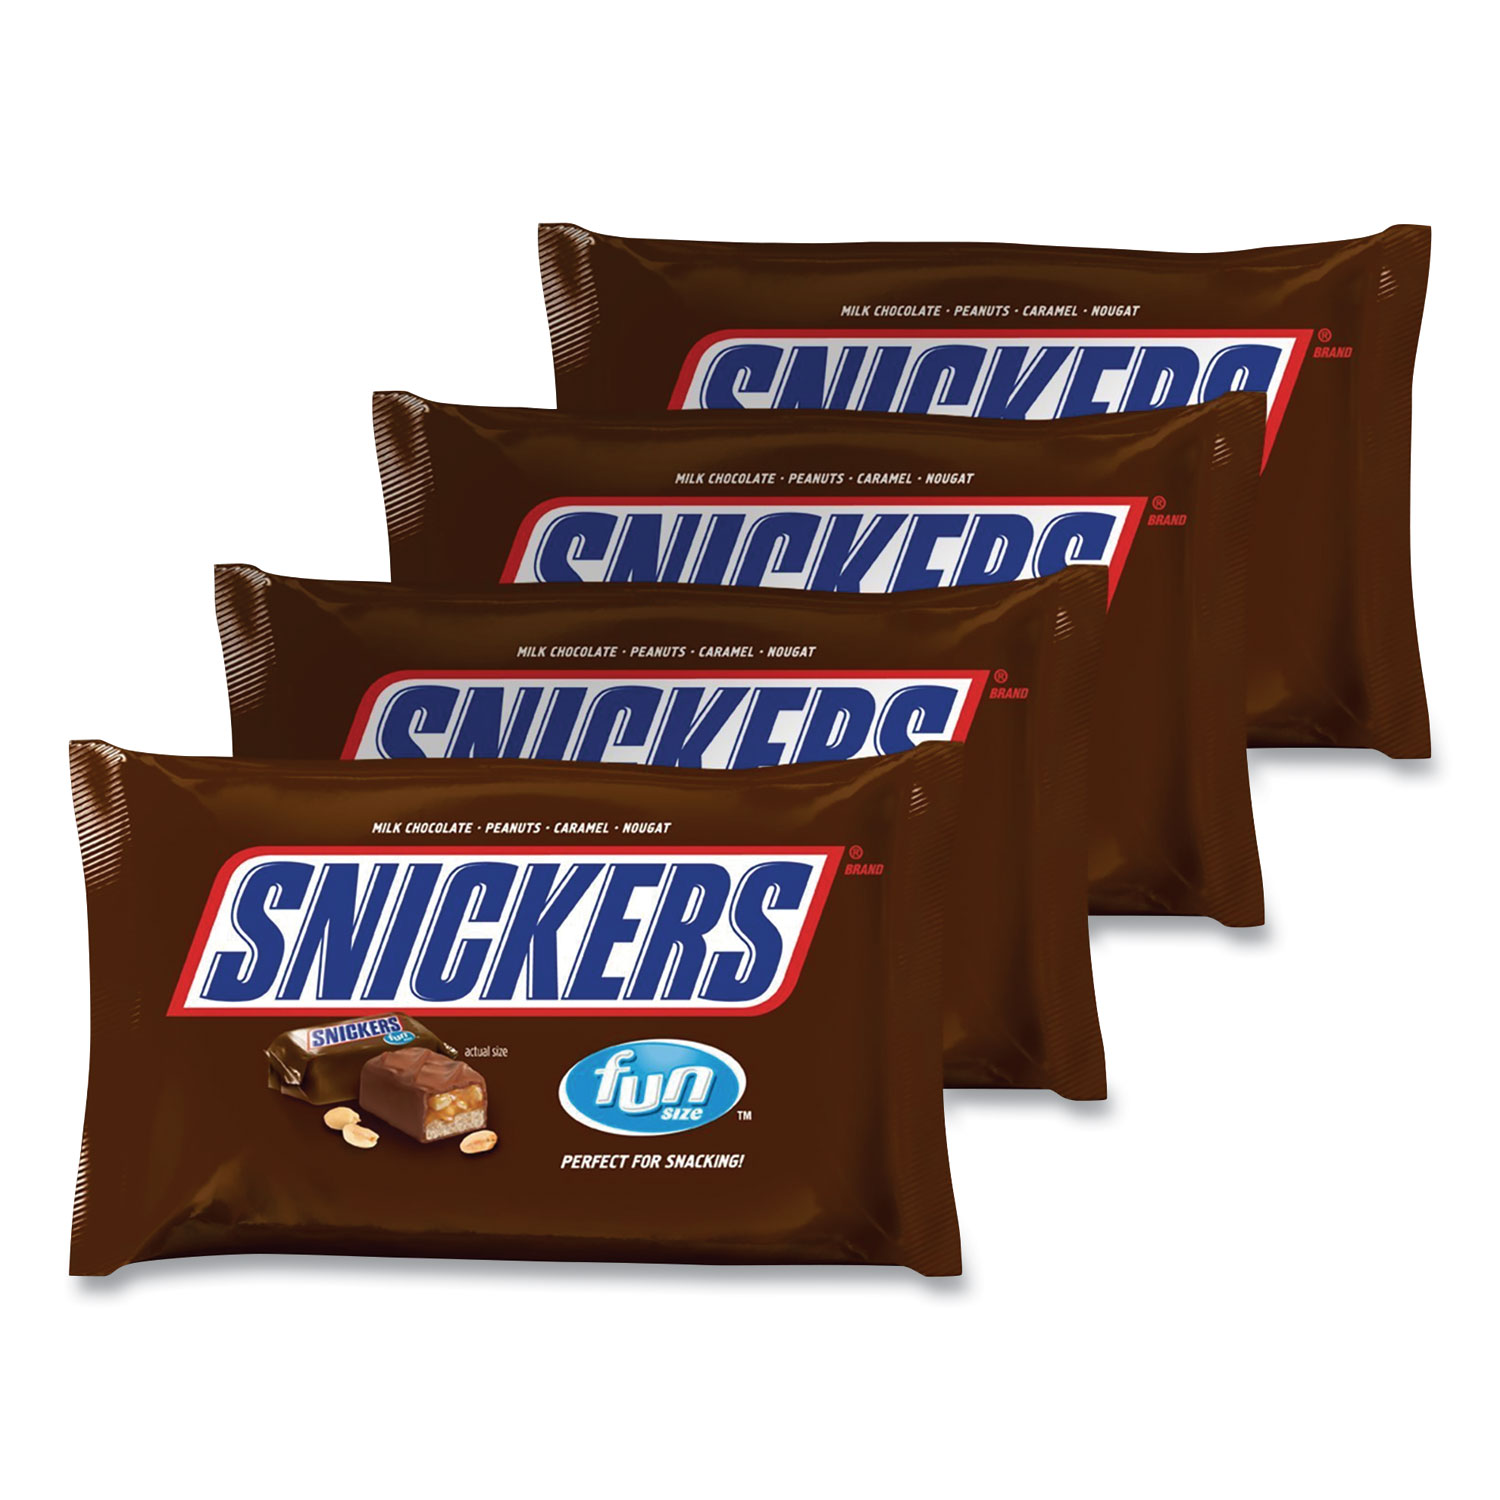  Snickers 323179 Original Candy Bar, Fun Size, 20.77 oz Bag, 4 Bags/Pack, Free Delivery in 1-4 Business Days (GRR22500040) 